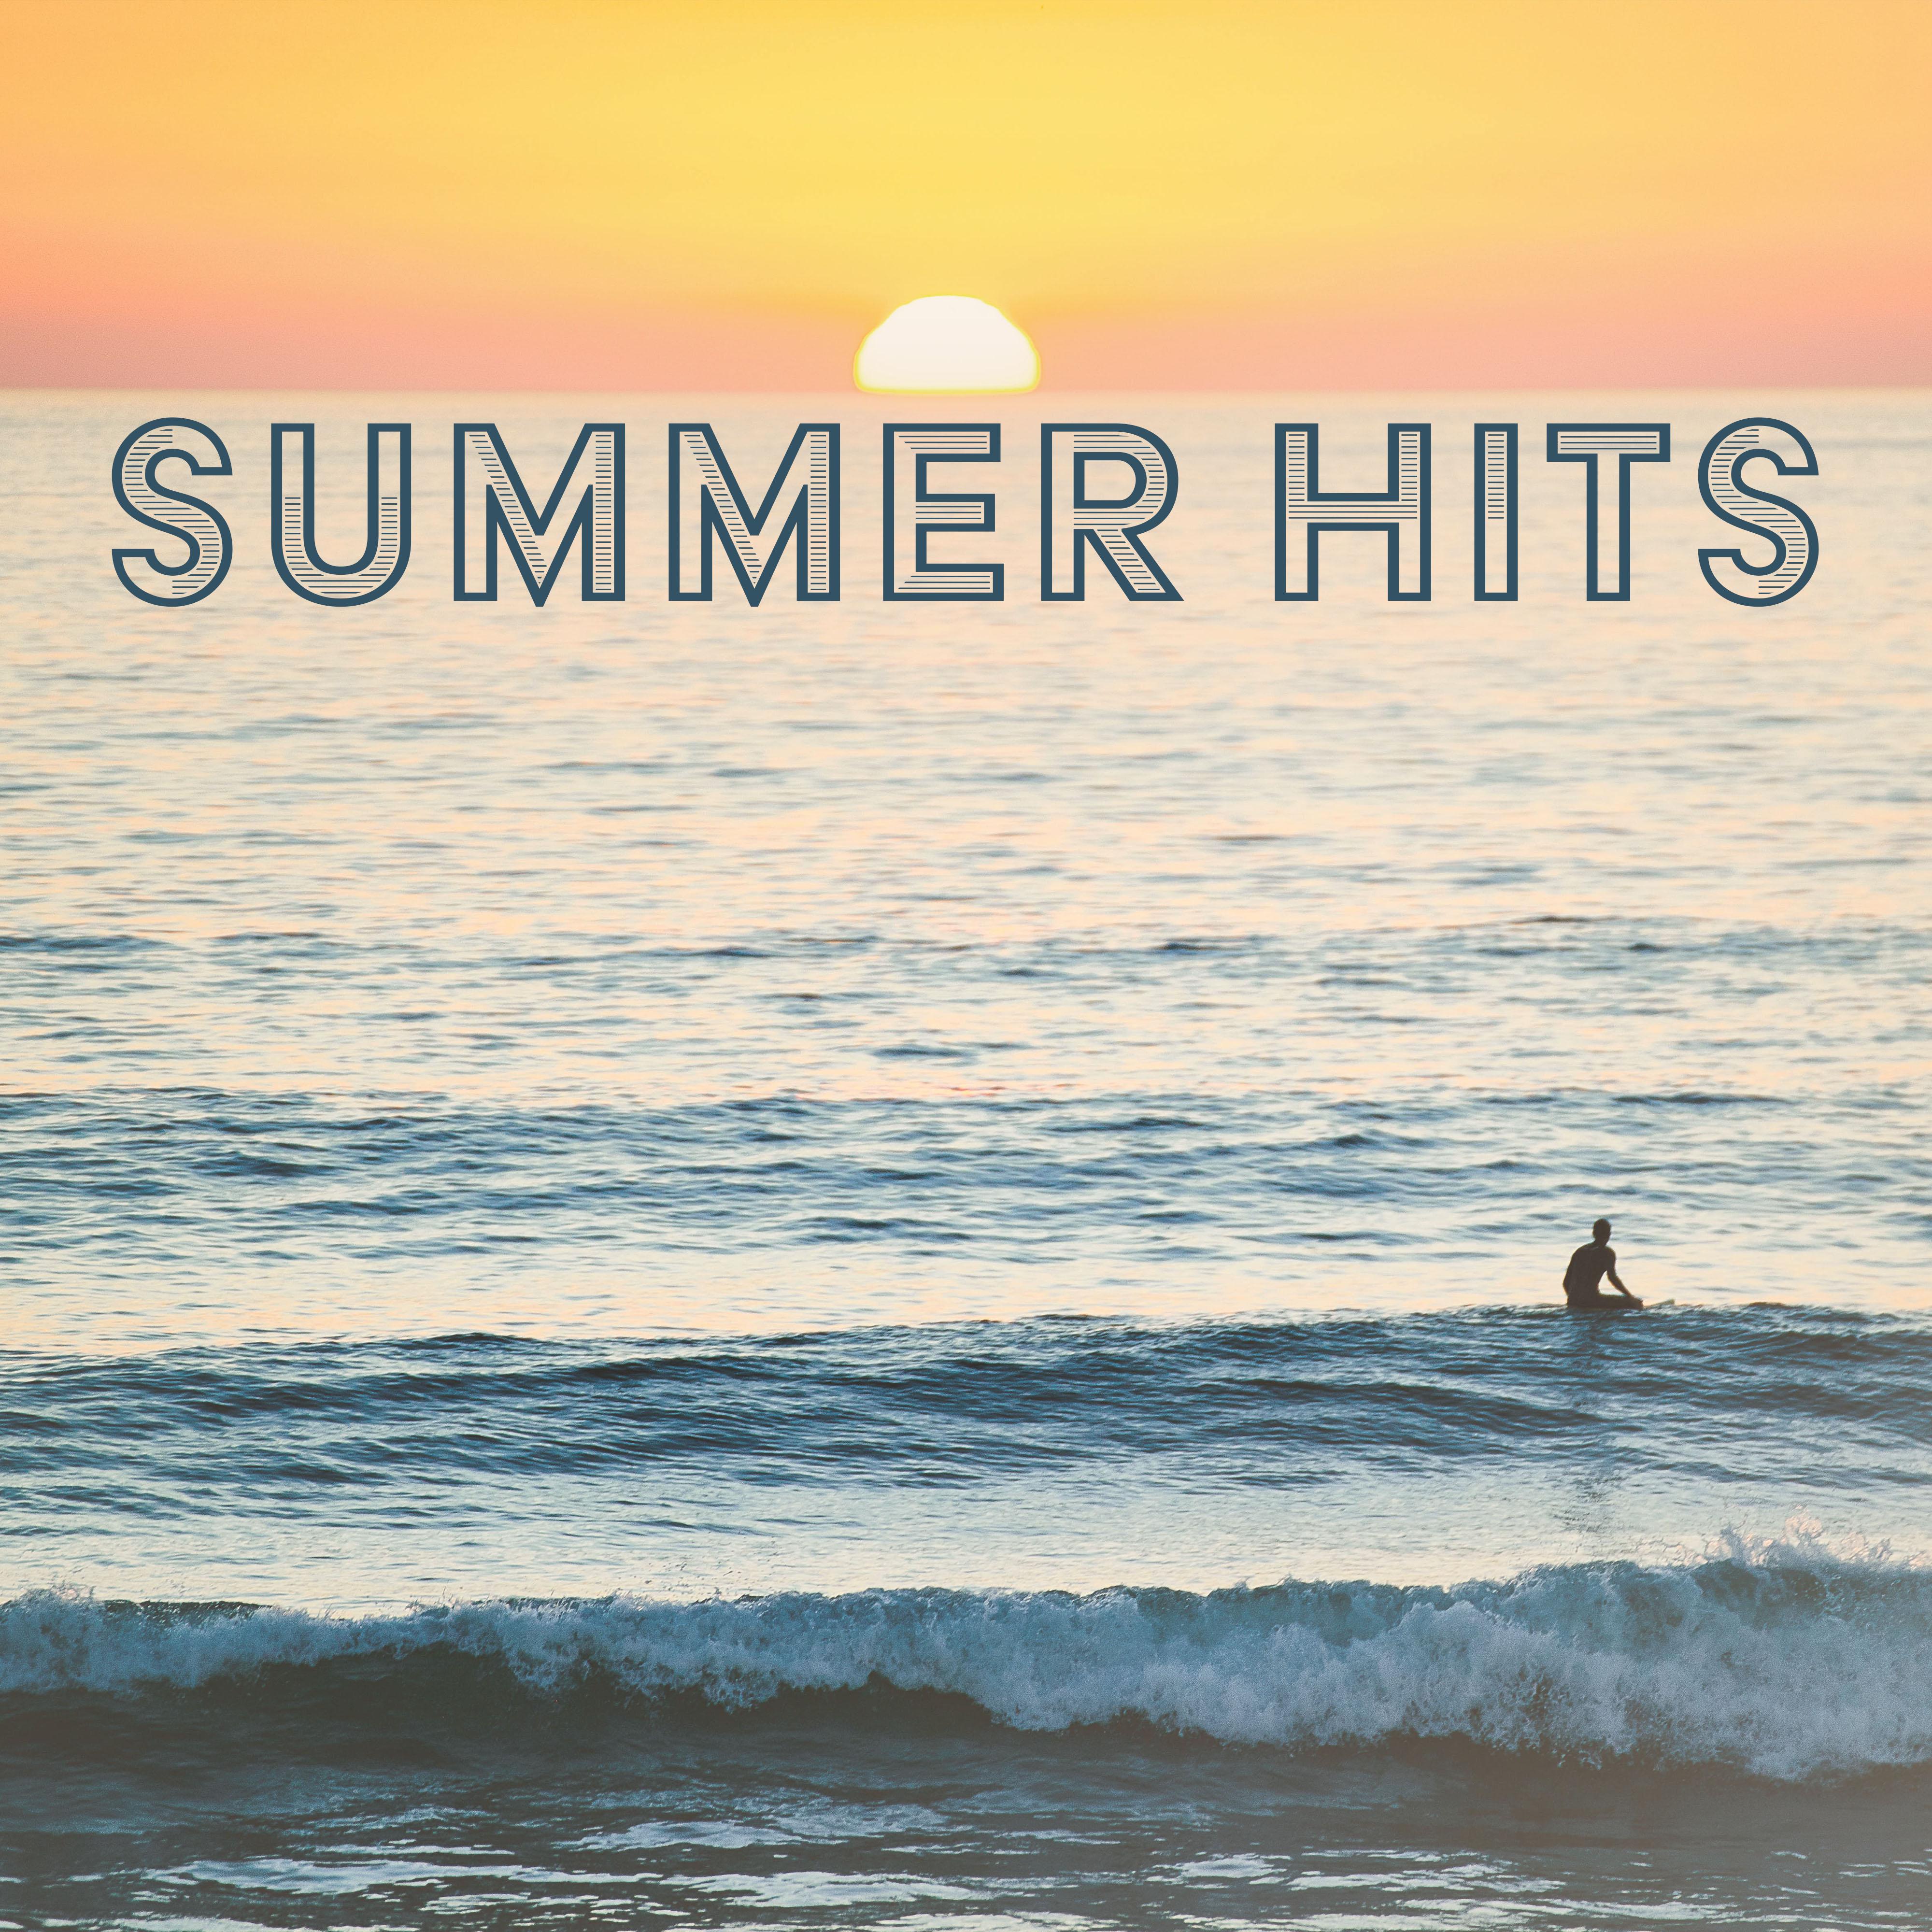 Summer Hits – Ibiza Dance Party, Hot Riviera, Tropical Chill Out, Dancefloor, Colorful Drinks, Drink Bar, Party Night